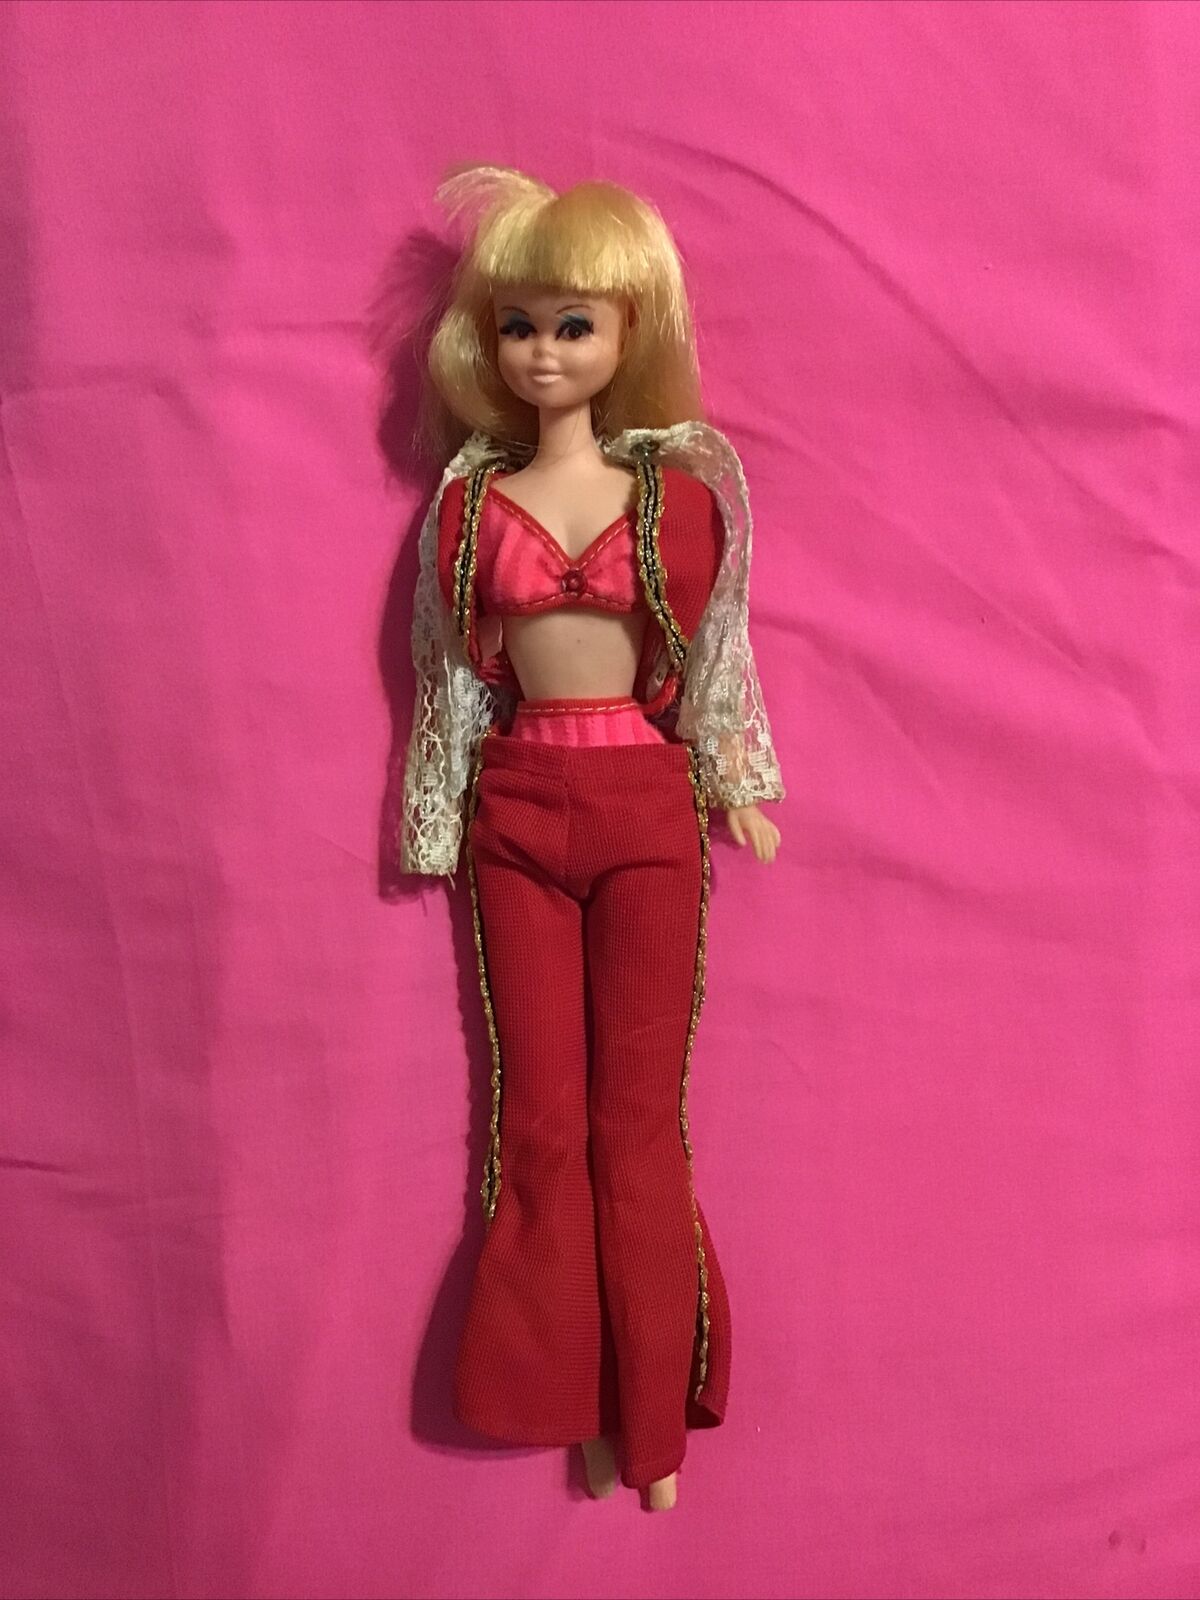 Vintage 1970 Blonde Maddie Mod Doll Mego Corp with Original Clothes